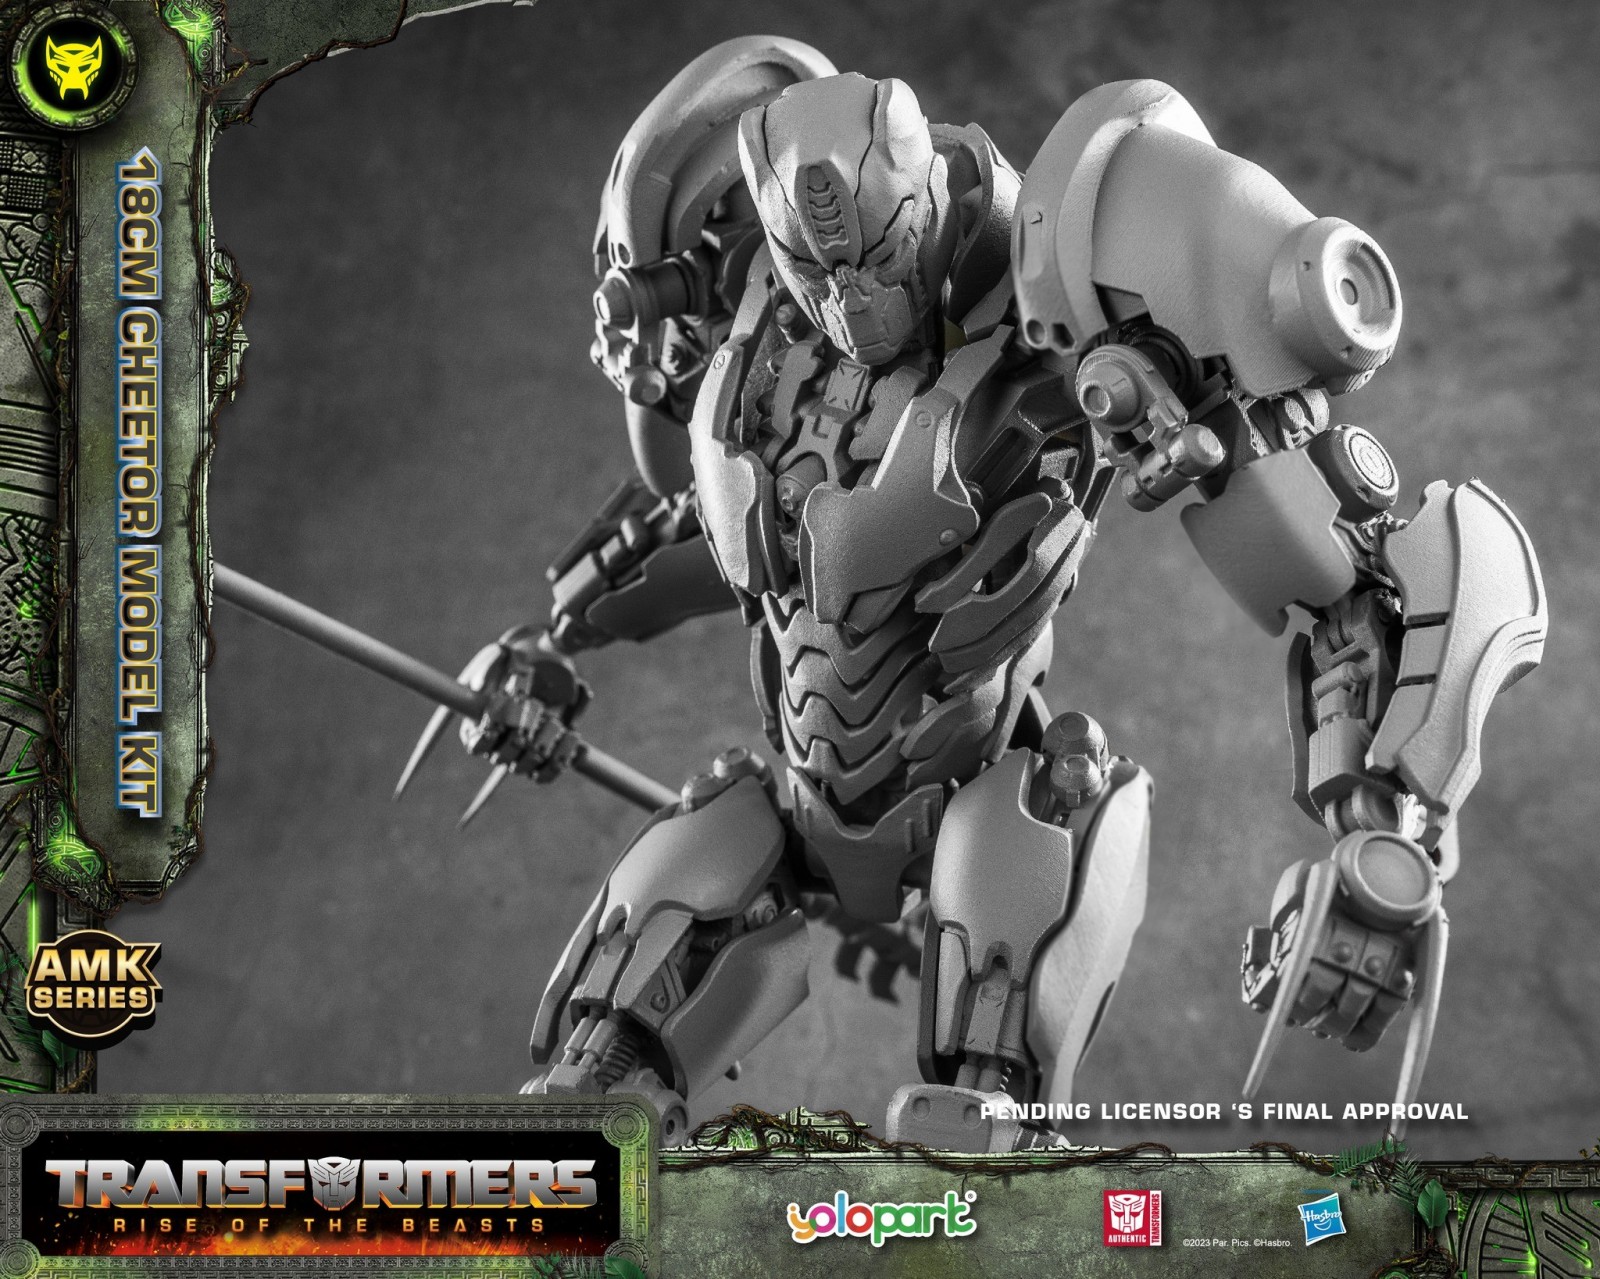 TFSource News – Yolopark Scourge, Rhinox and Cheetor, Trupeter Smart Kits,  Masterpiece and More! – The Allspark